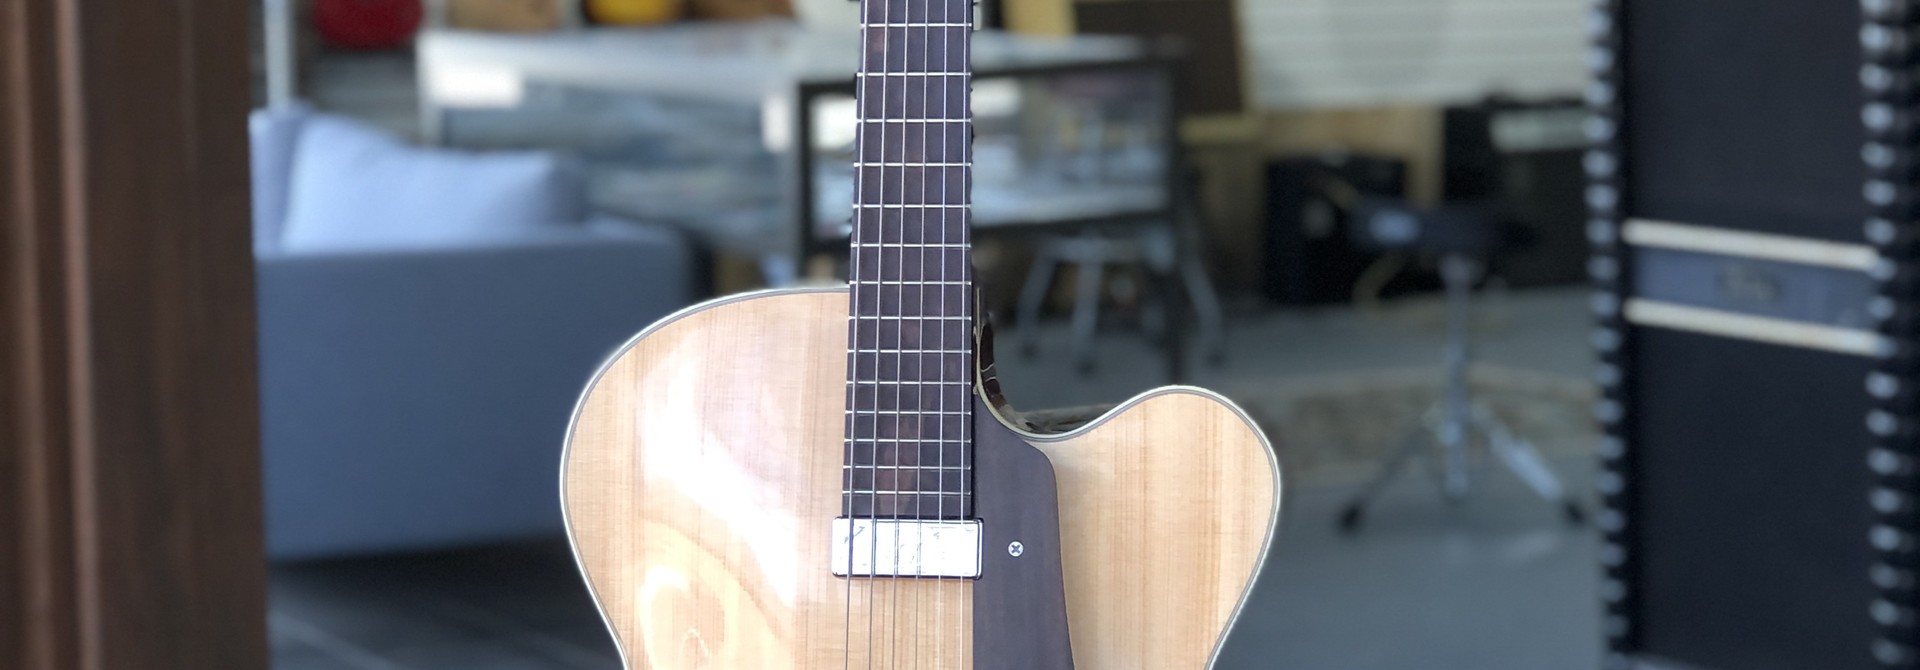 Archtop G5 - Galloup School